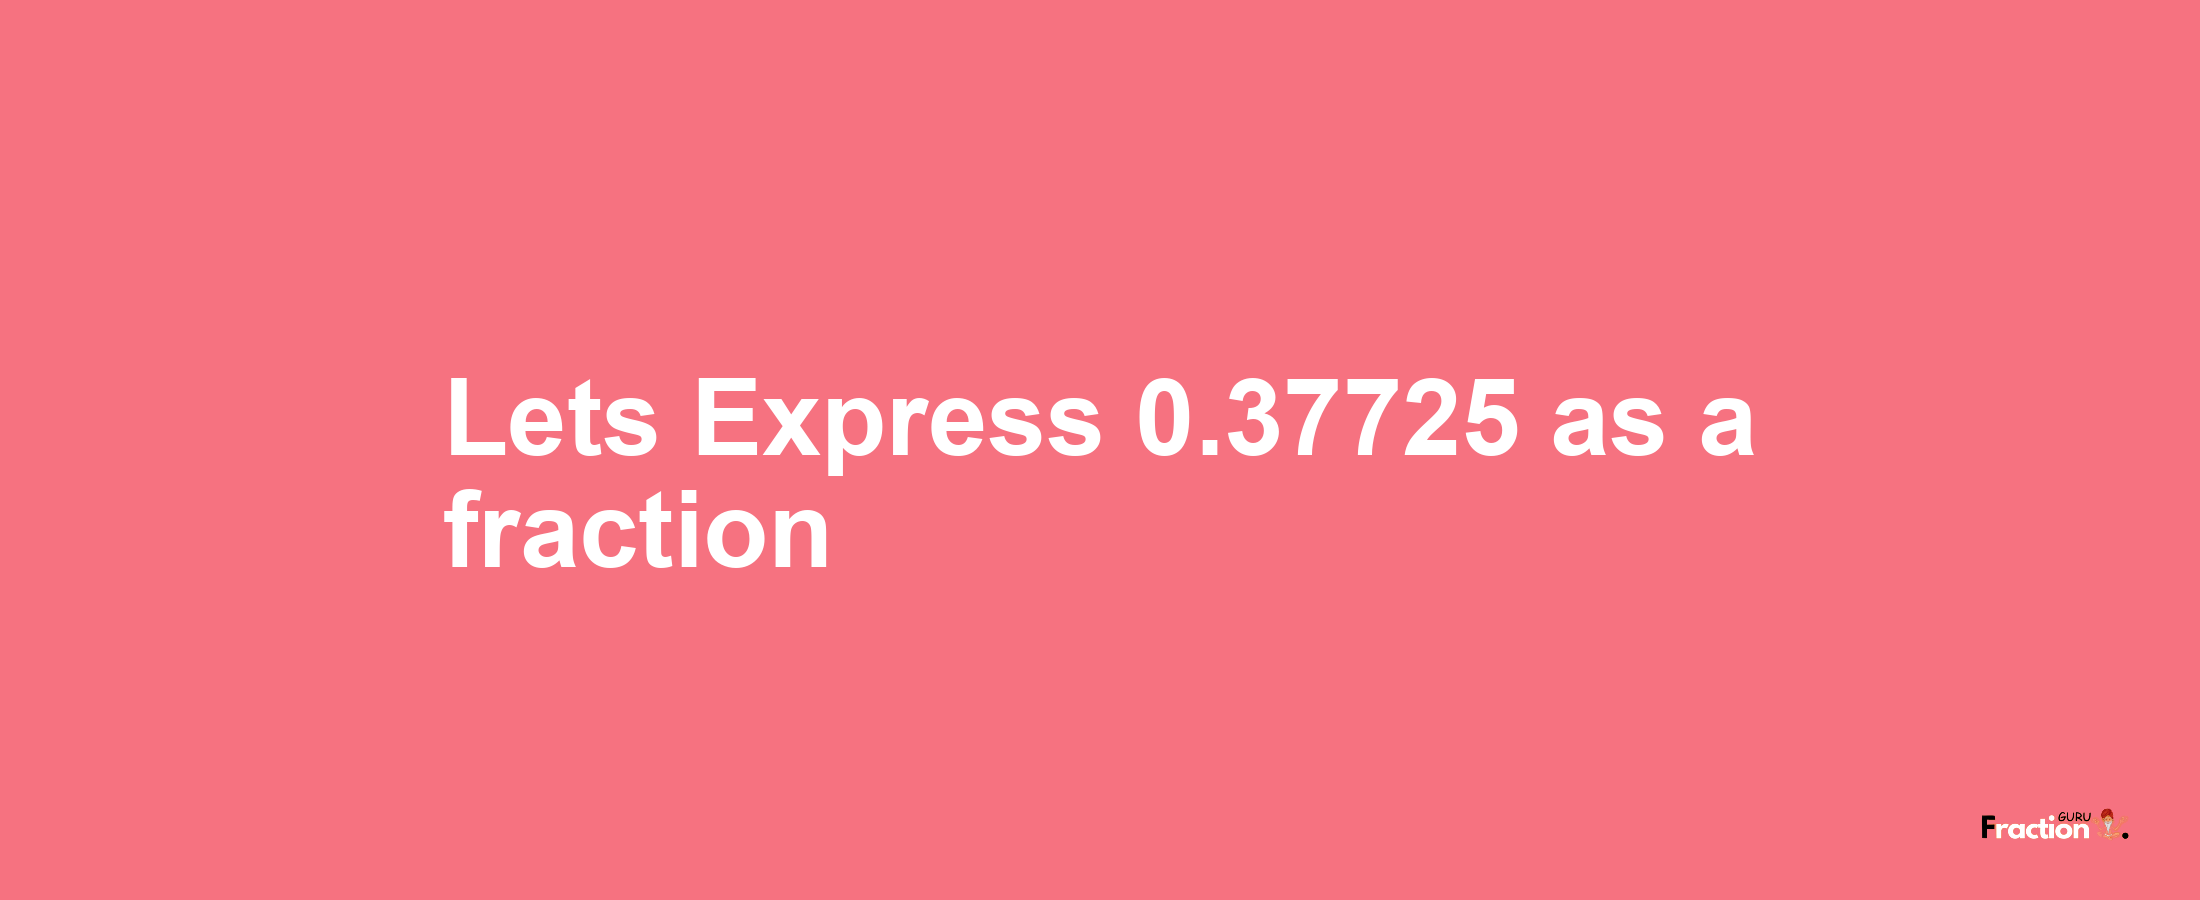 Lets Express 0.37725 as afraction